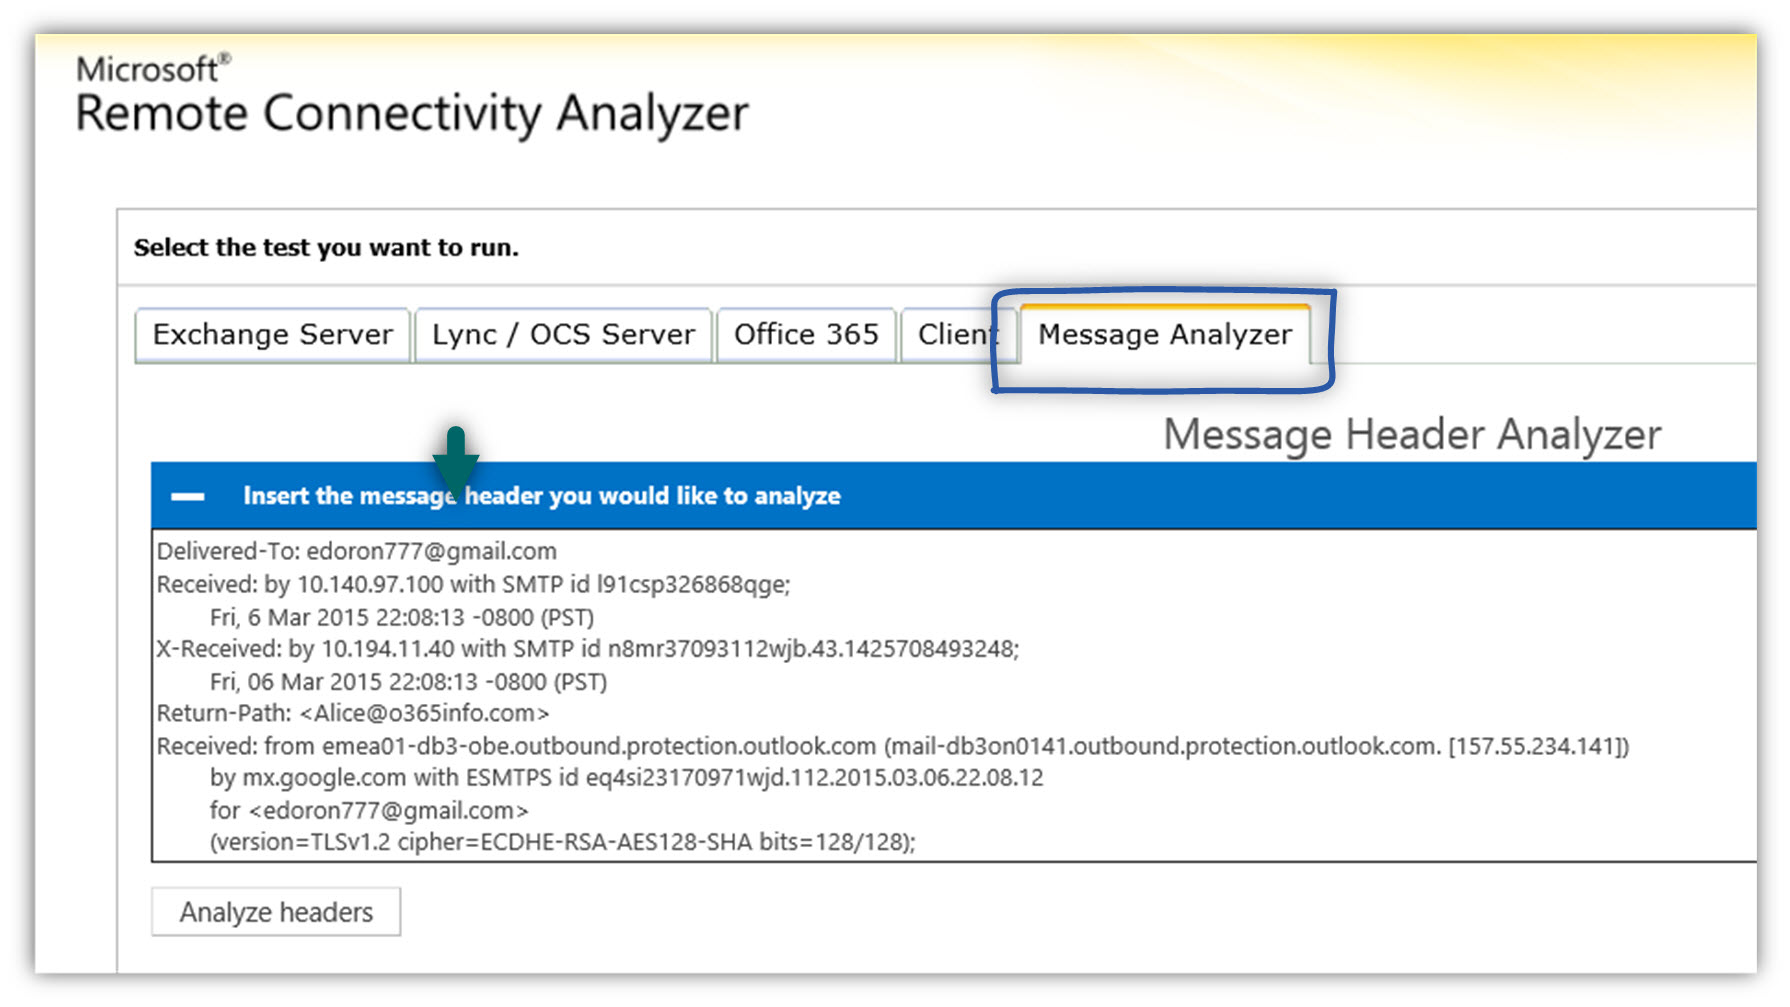 Analyzing the information from the E-mail message that was identified as spam NDR -01